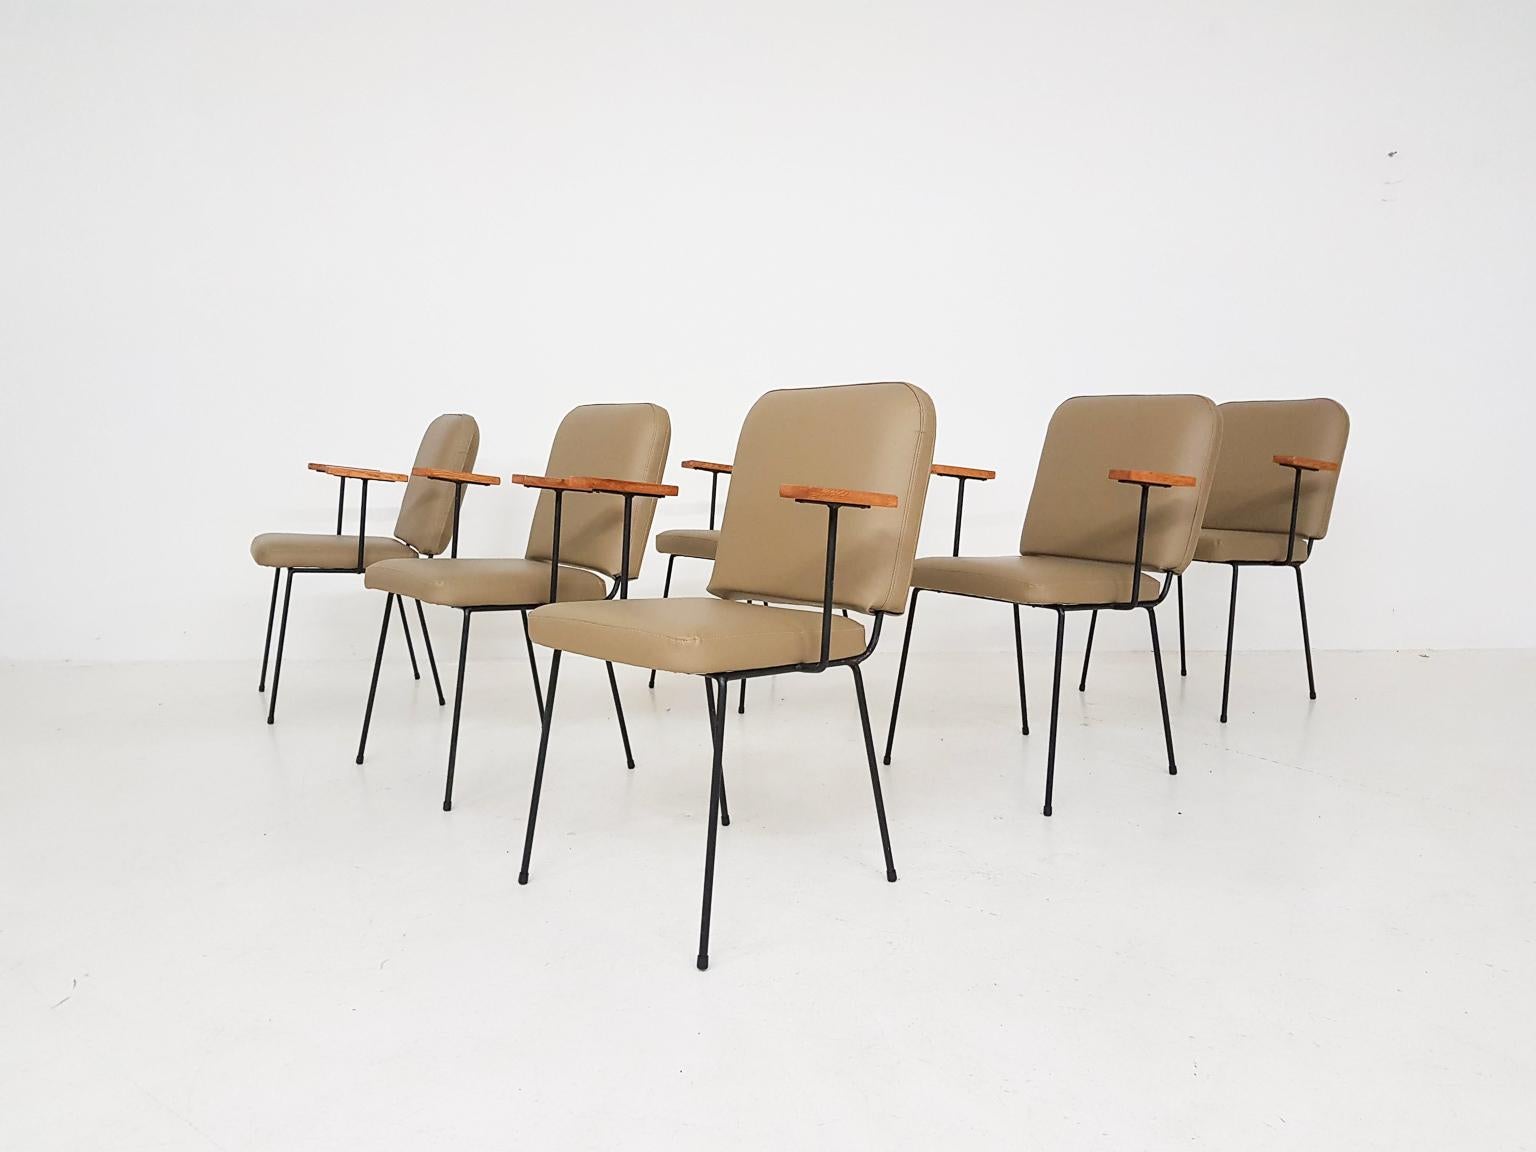 A set of 6 dining chairs with new beige leatherette upholstery. Made in Europe in the midcentury. We are not sure which country, but we think they are Danish, Swedish or Dutch design.

The set is very comfortable because of the thick seating and